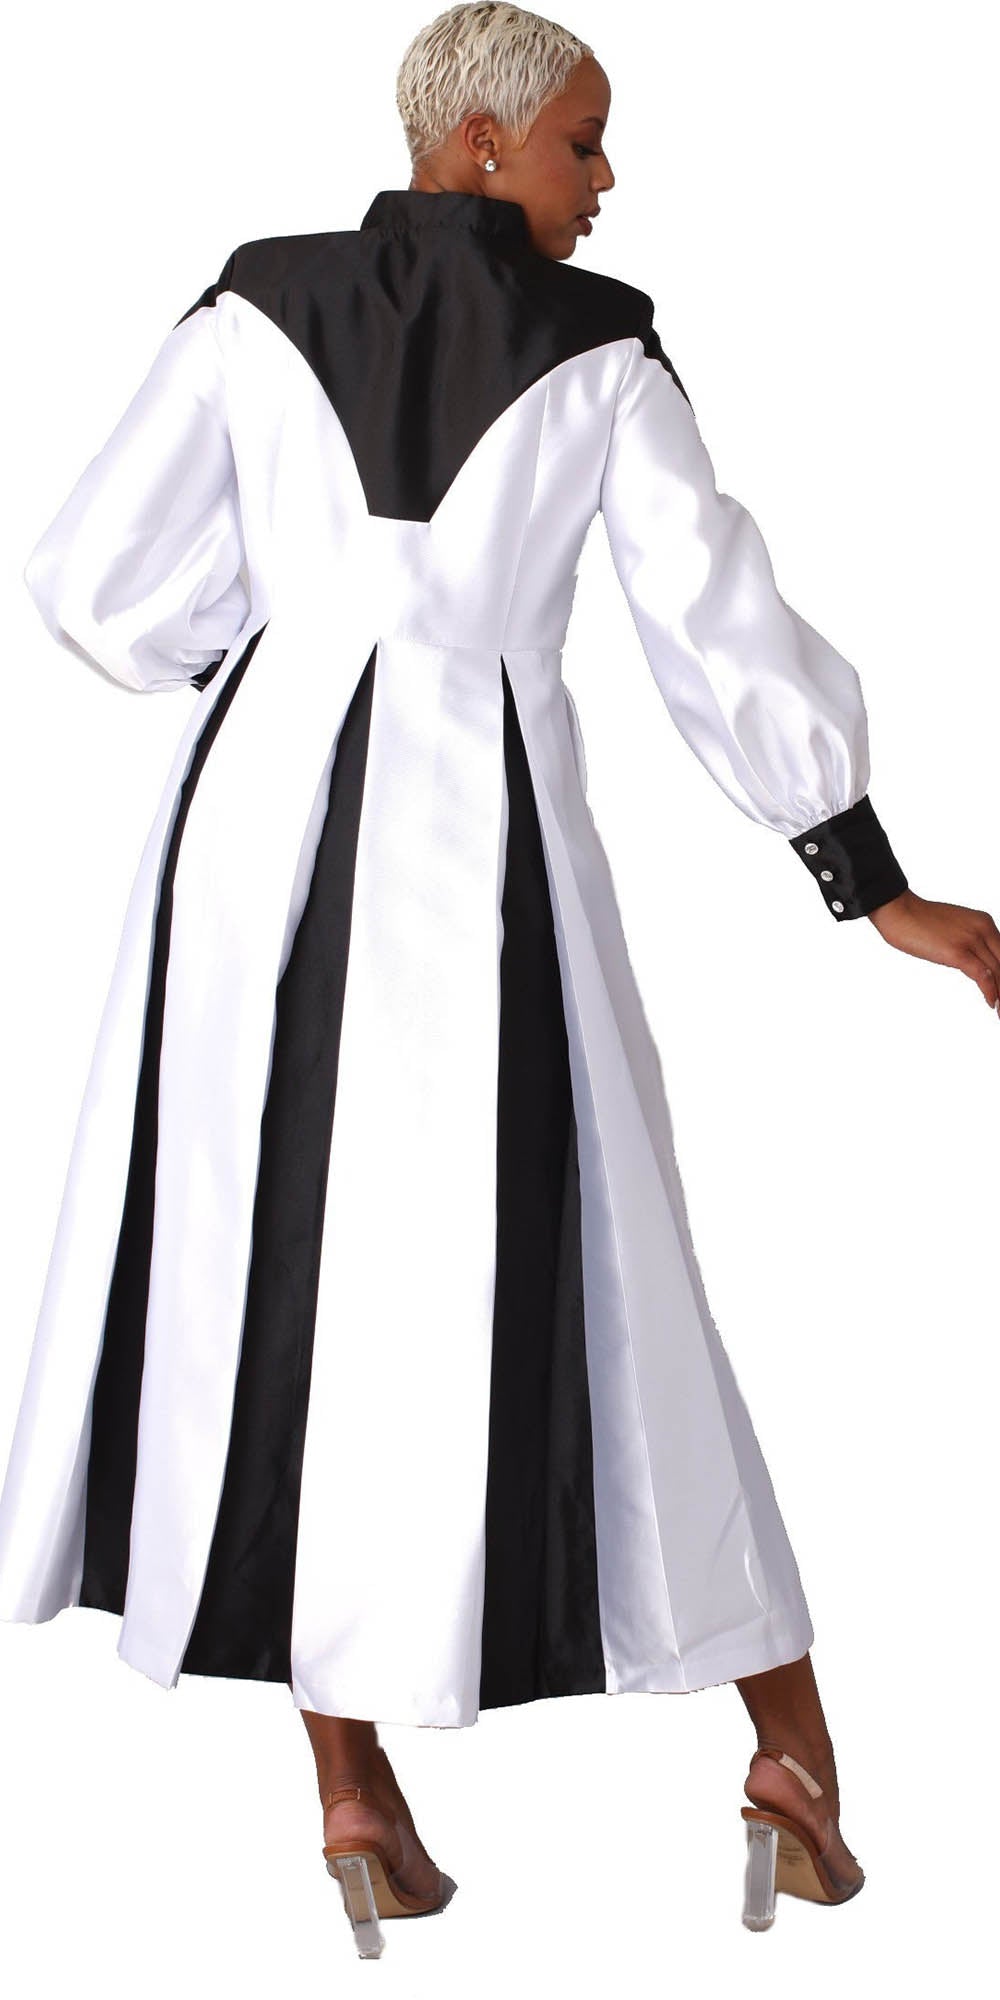 Tally Taylor - 4802 - White Black - Women's Clergy Dress With Bishop Sleeves